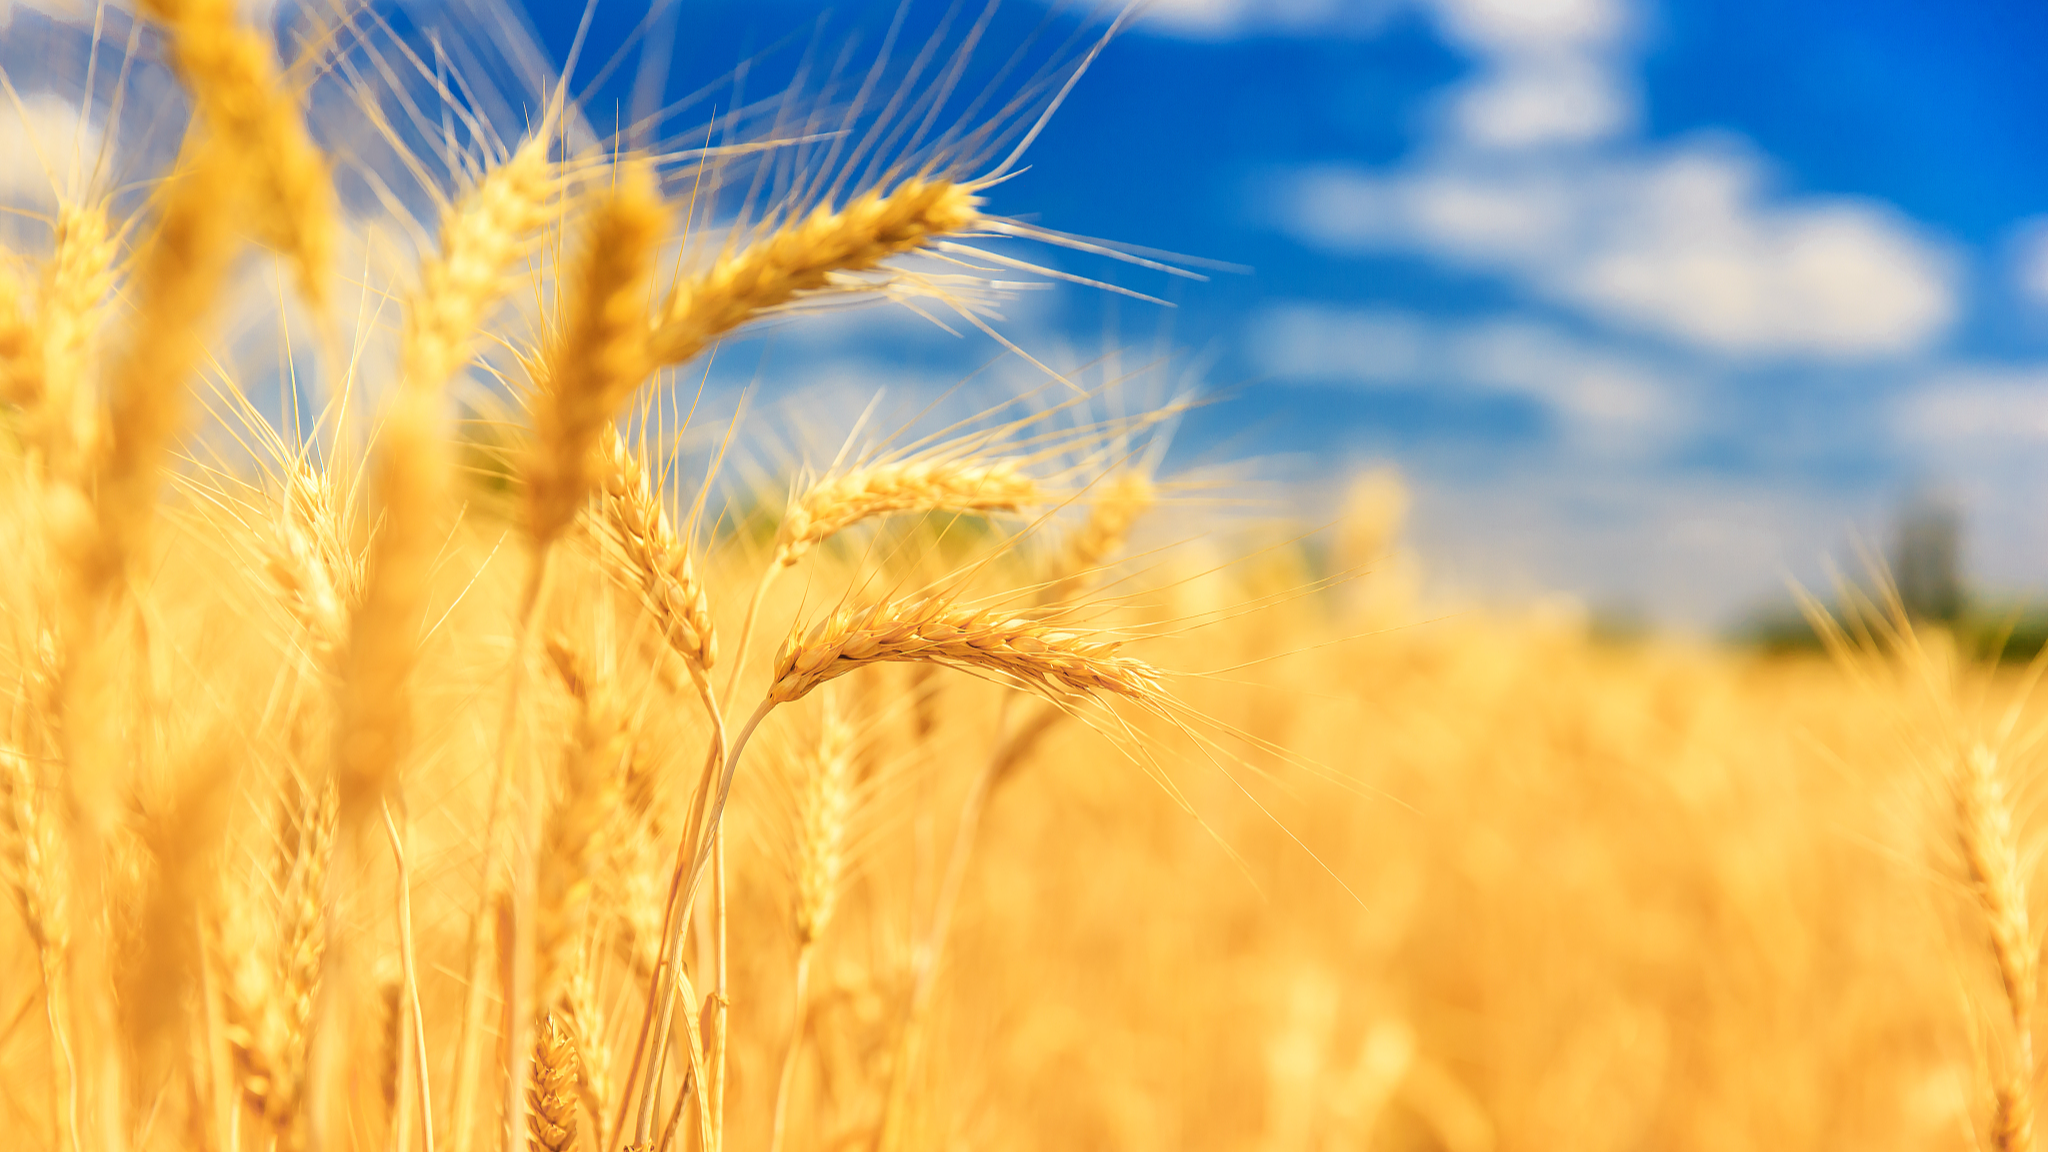 Chinese researchers have decoded a novel salt-tolerance gene in wheat, resulting in yield increases of 5 to 9 percent in experimental varieties grown in saline-alkali soils. /CFP